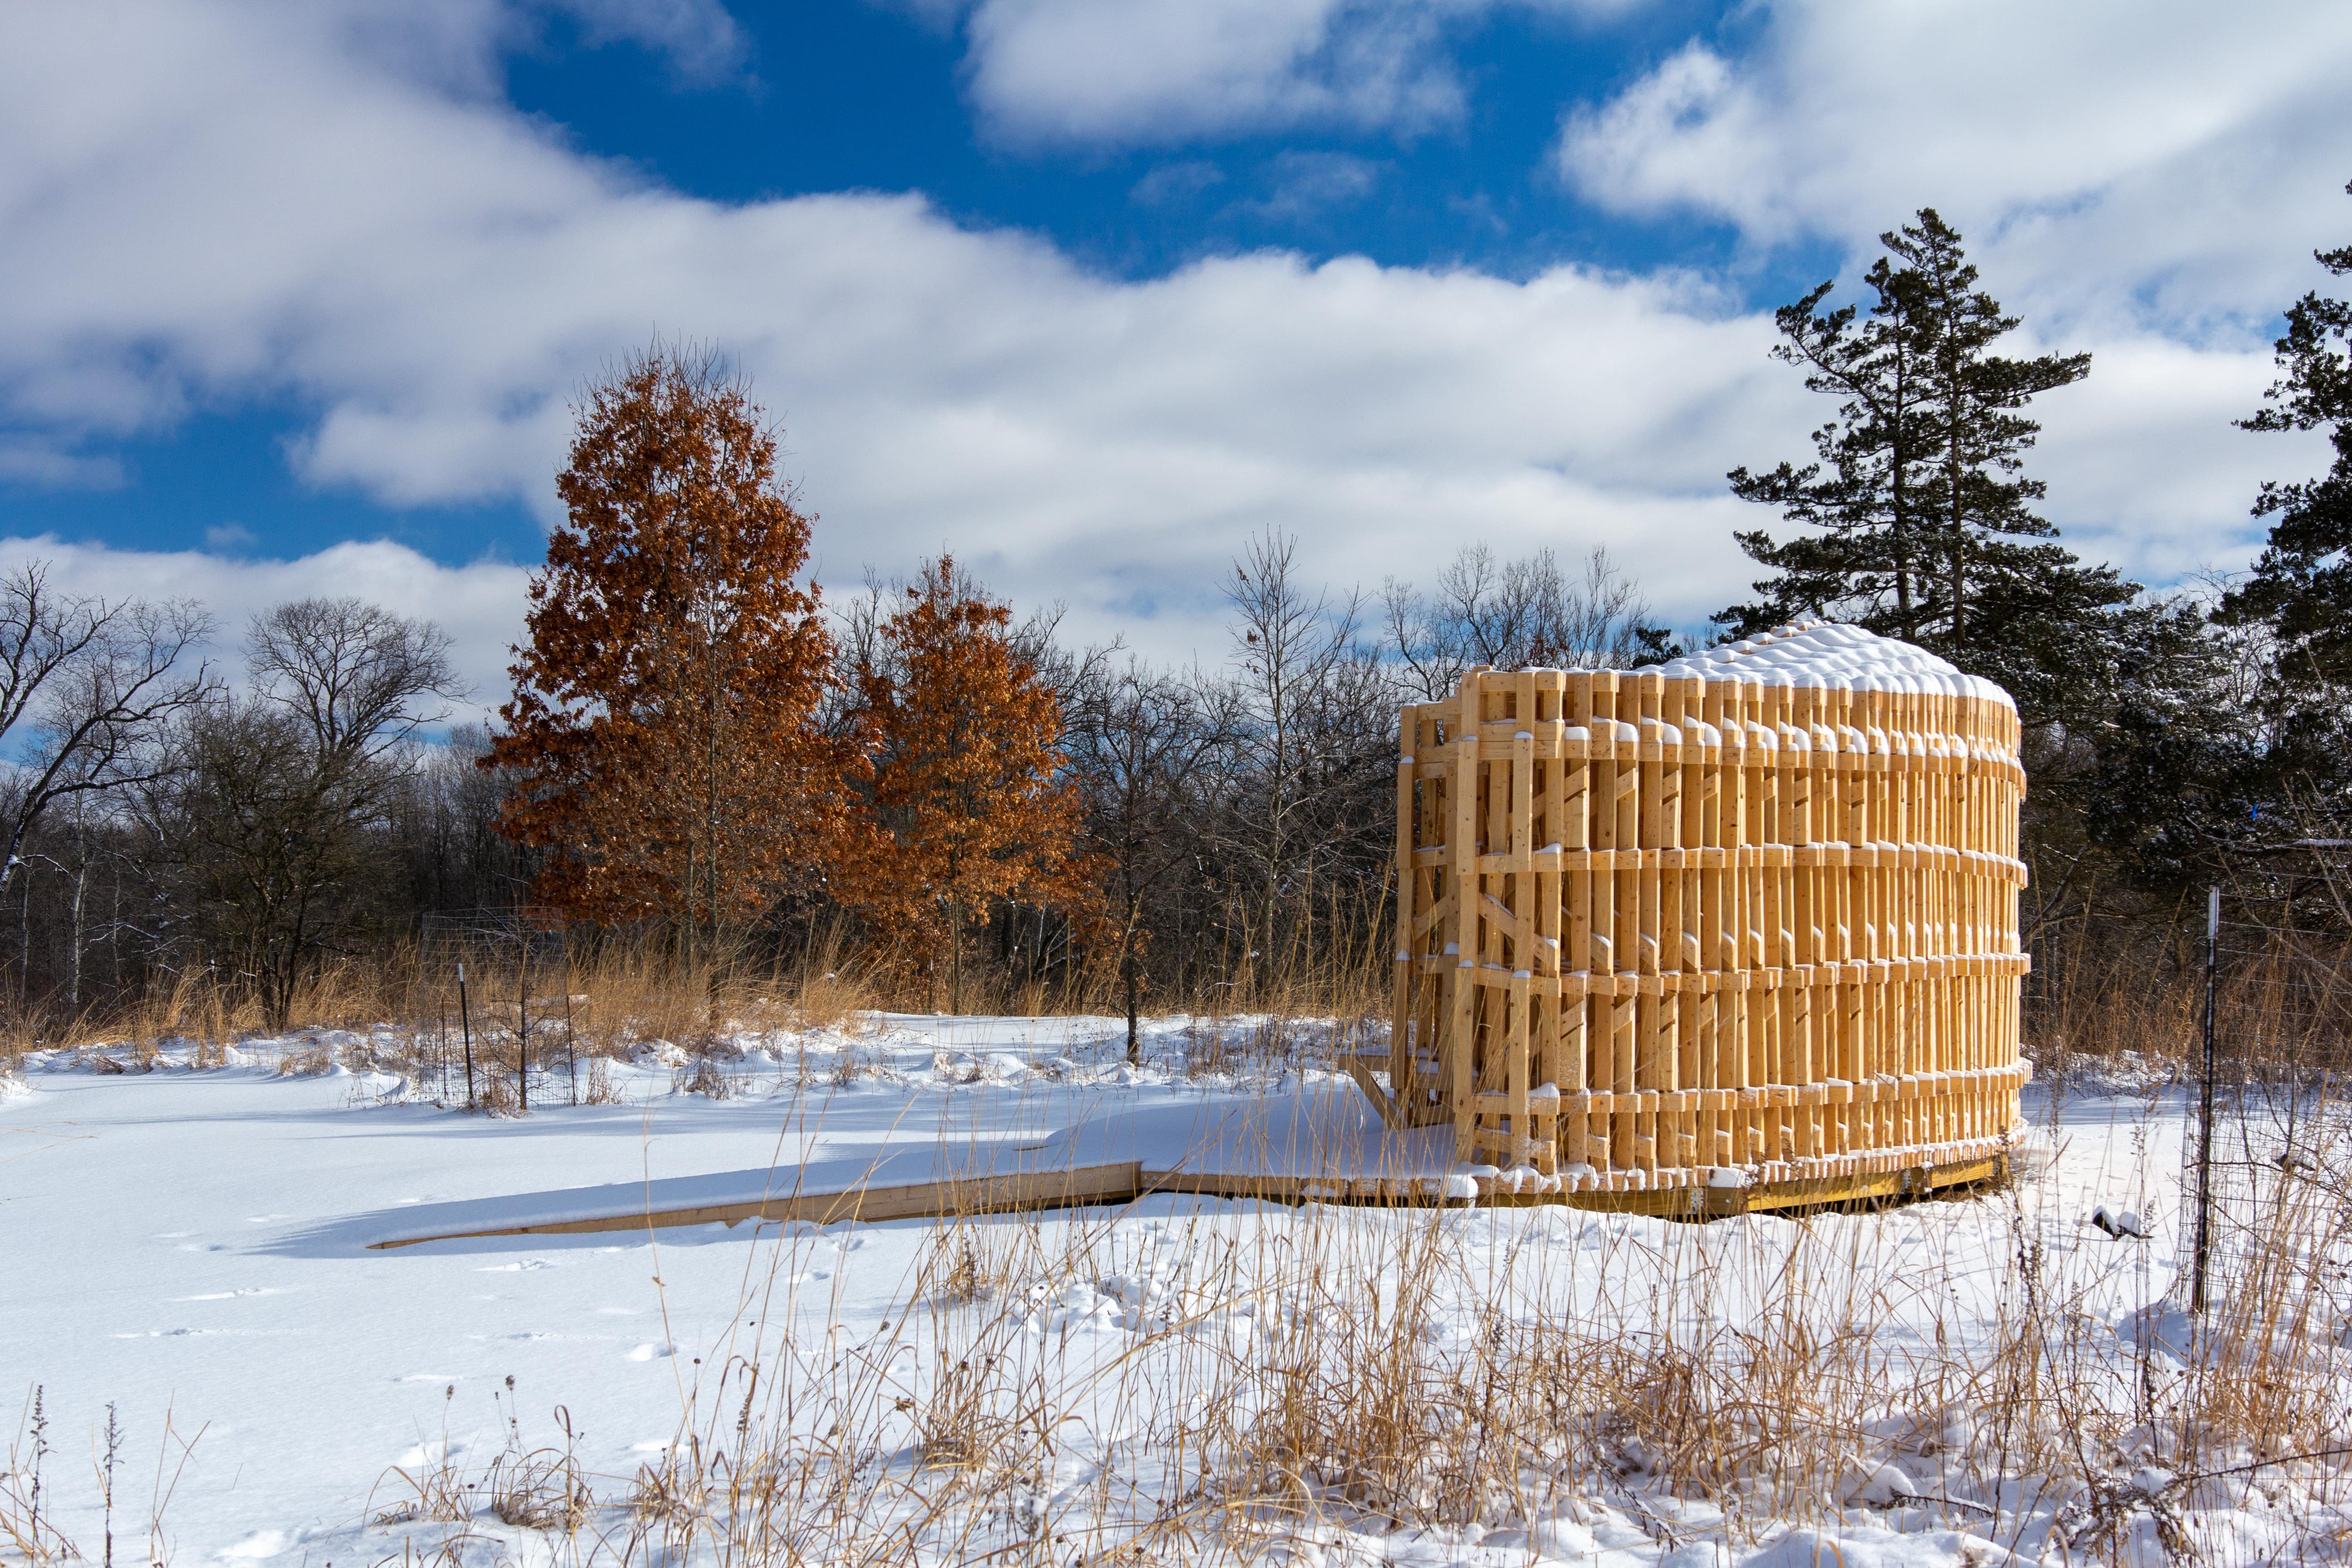 Exploration of Robotic Technology in Designing Complex Wooden Pavilions